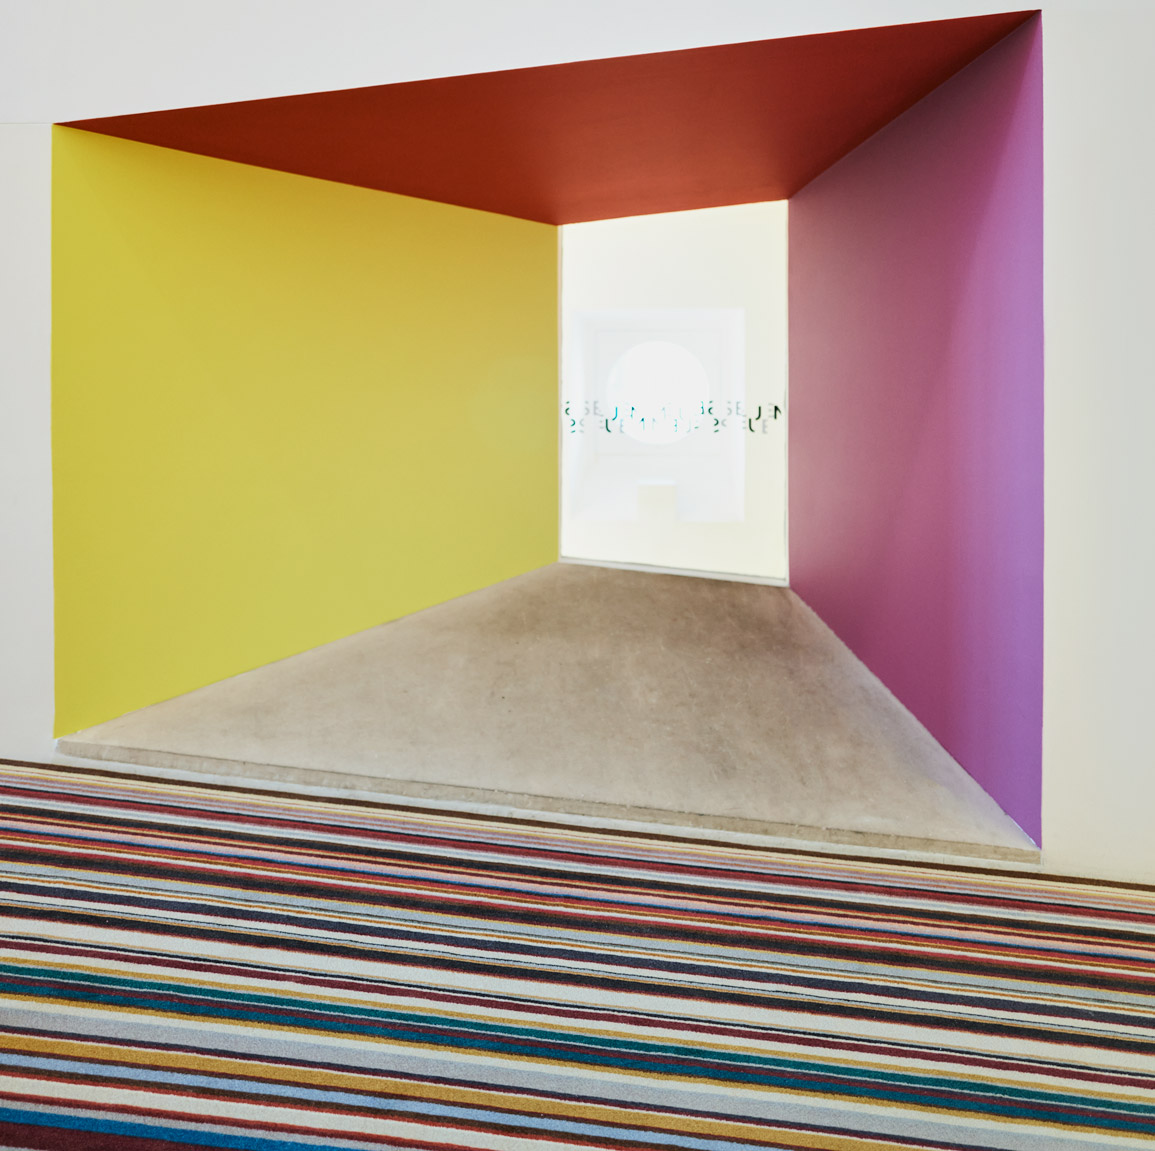 Installation of Stripe by Paul Smith